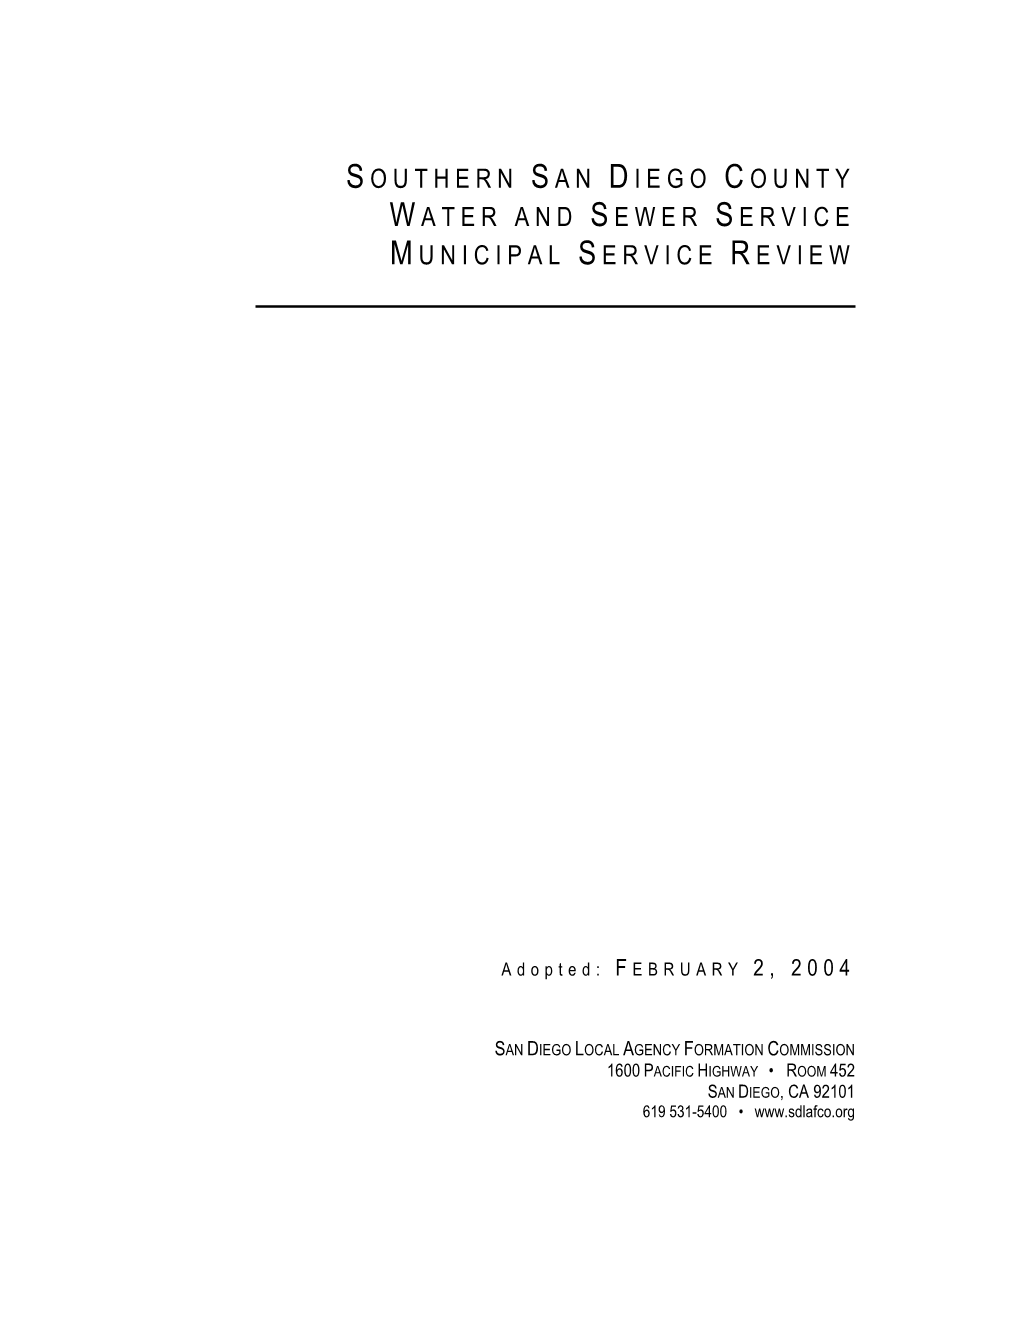 Southern San Diego County Sewer and Water Municipal Service Review